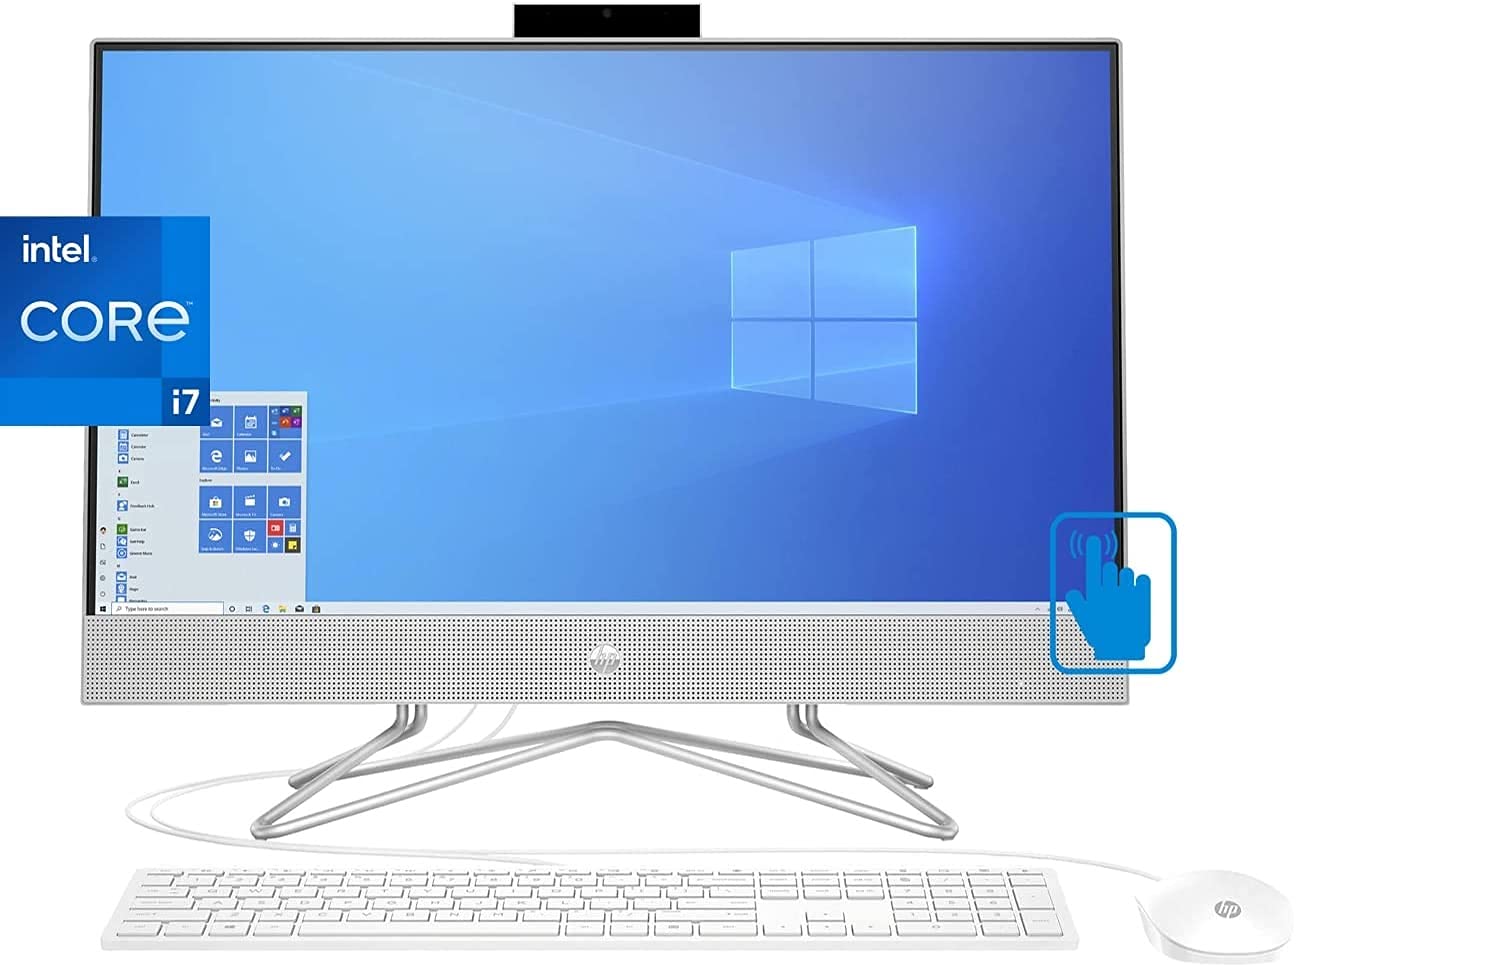 HP Pavilion 27 TOUCH Desktop 1TB SSD 32GB RAM EXTREME (Intel 11th gen Quad Core i7 Processor and Turbo Boost to 4.70GHz, 32 GB RAM, 1 TB SSD, 27-inch FullHD TOUCHSCREEN, Win 10) PC Computer All-in-One